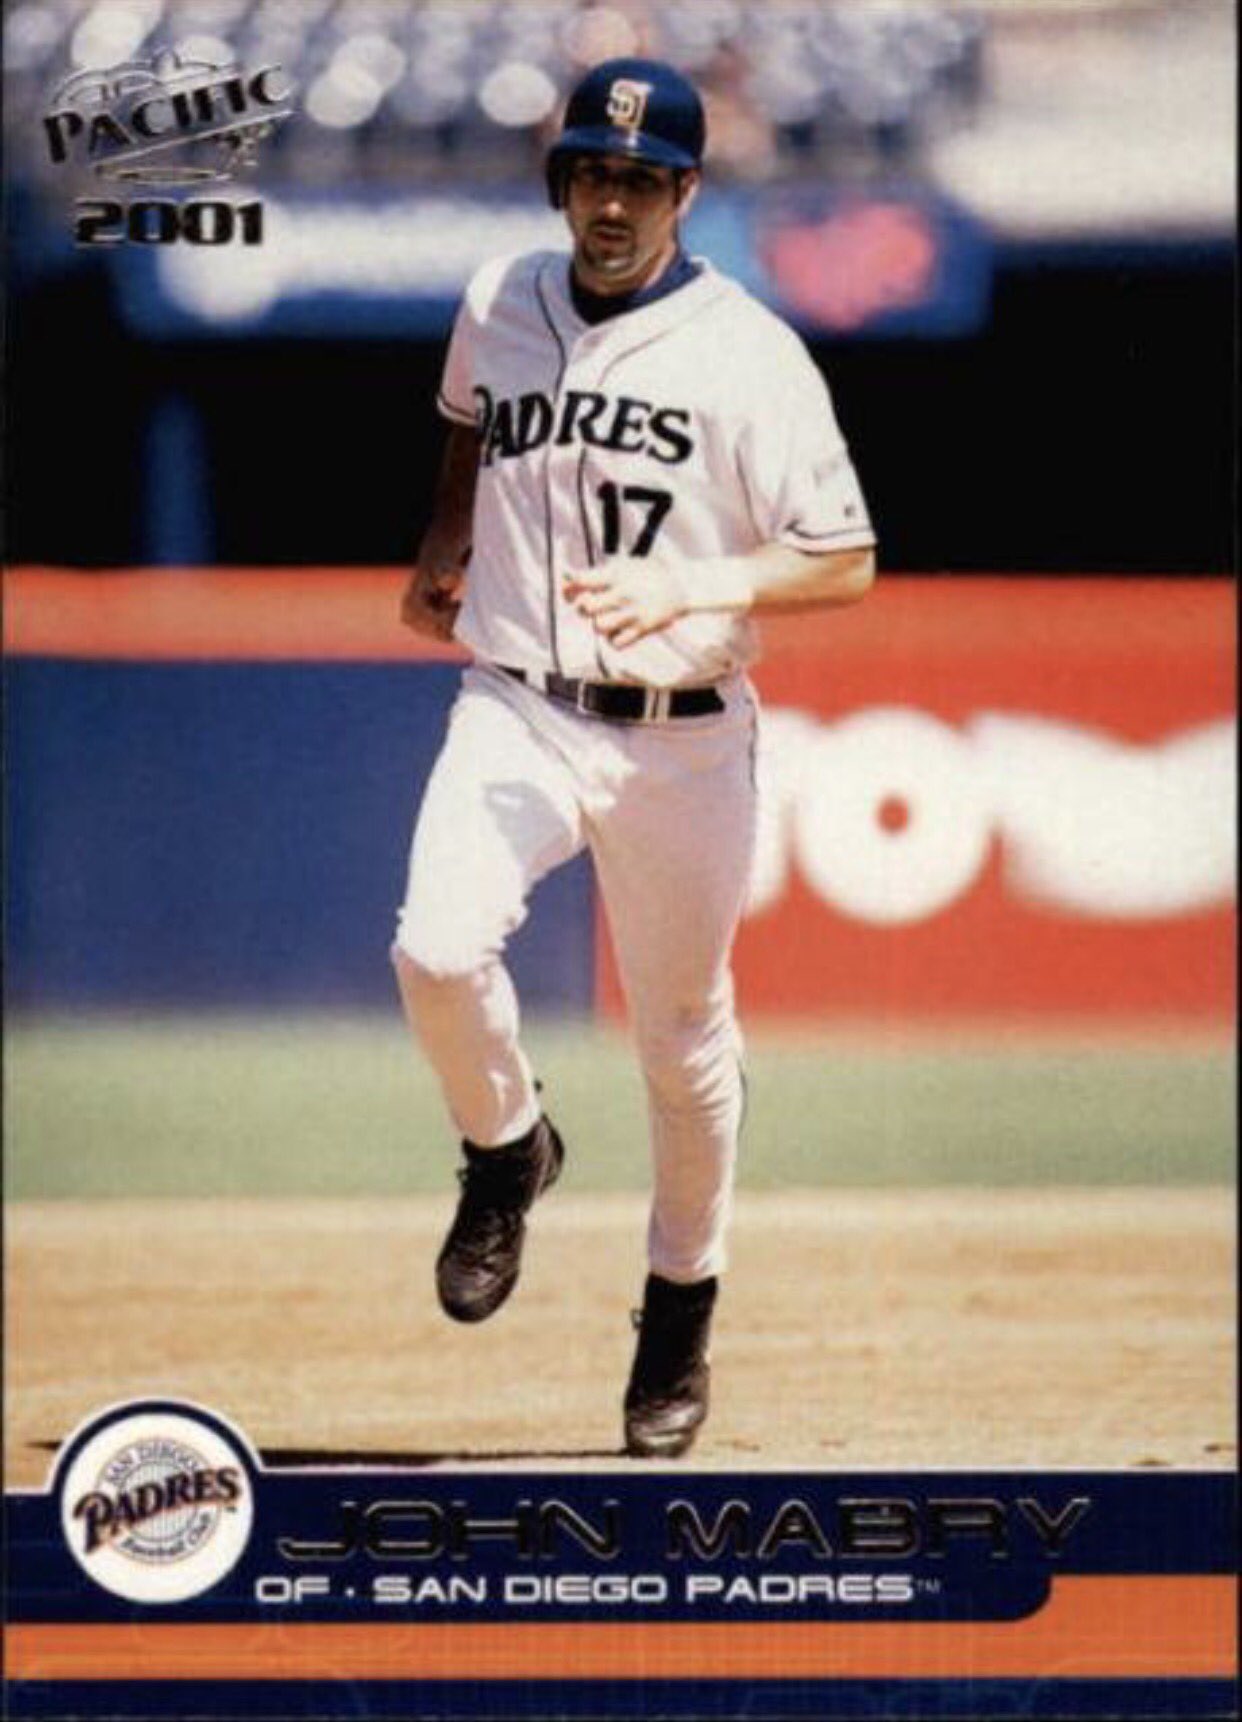 A Happy Birthday to former 1B and Outfielder John Mabry 